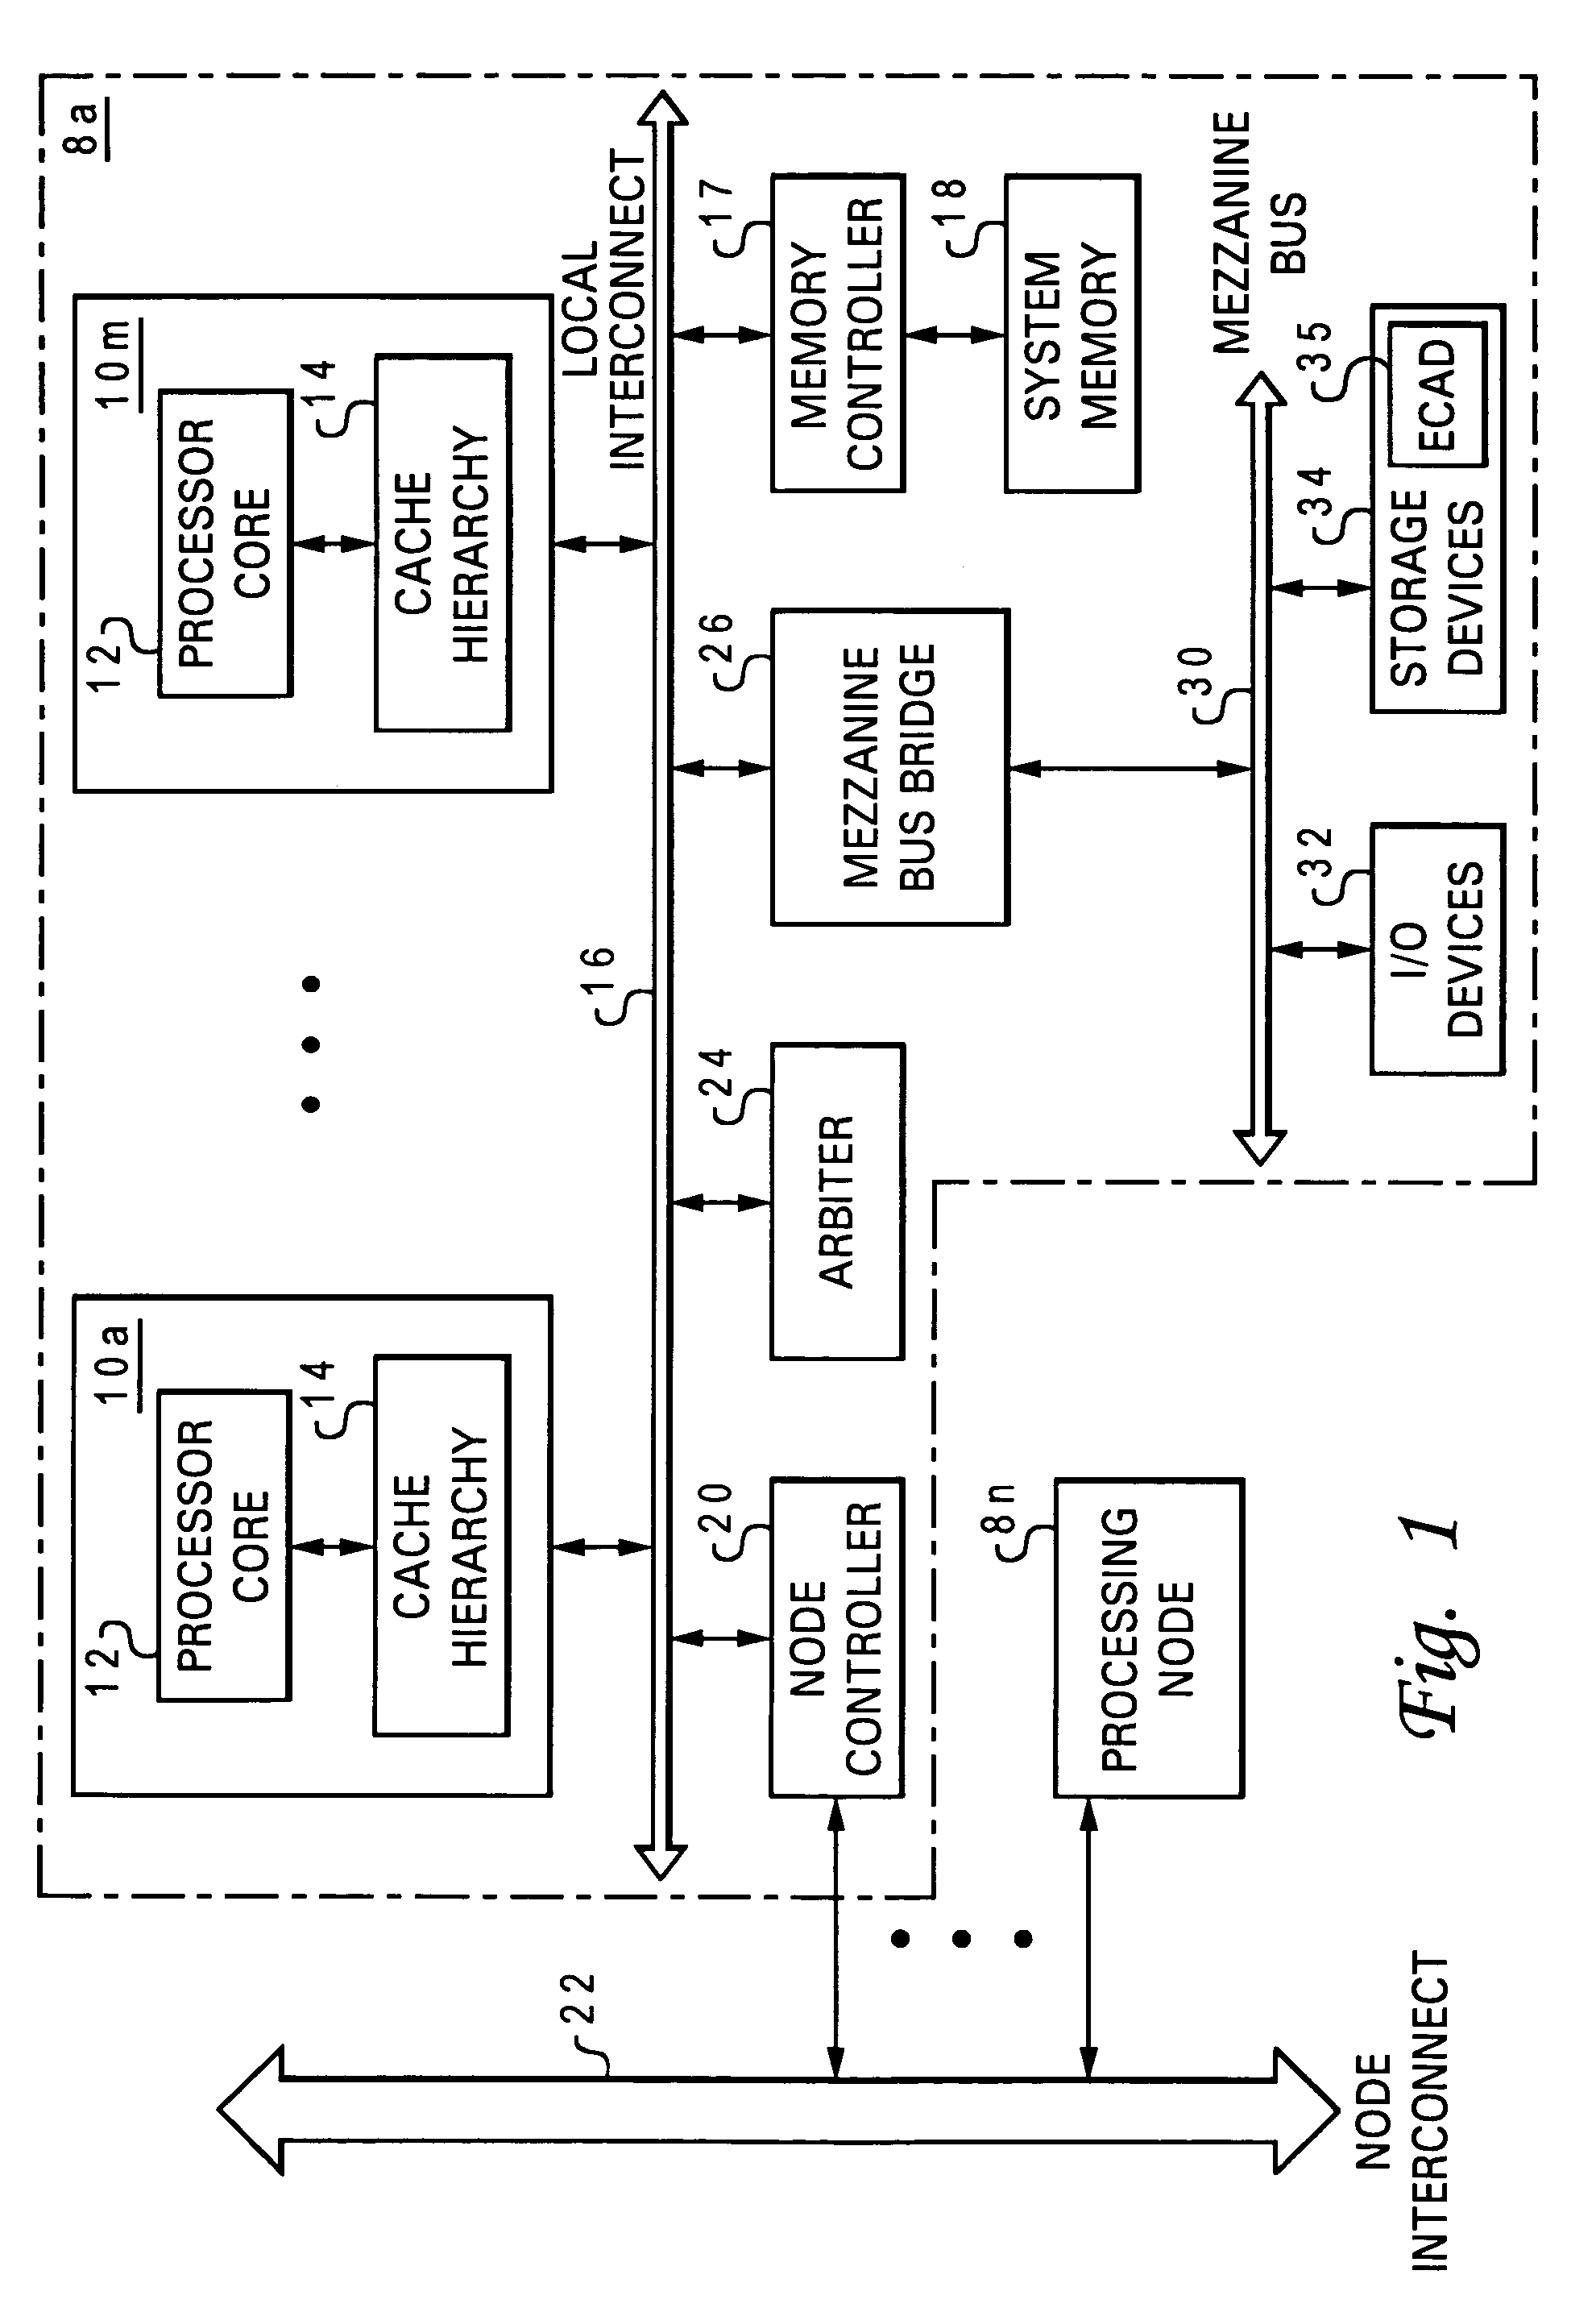 Method, system and program product providing a configuration specification language having split latch support